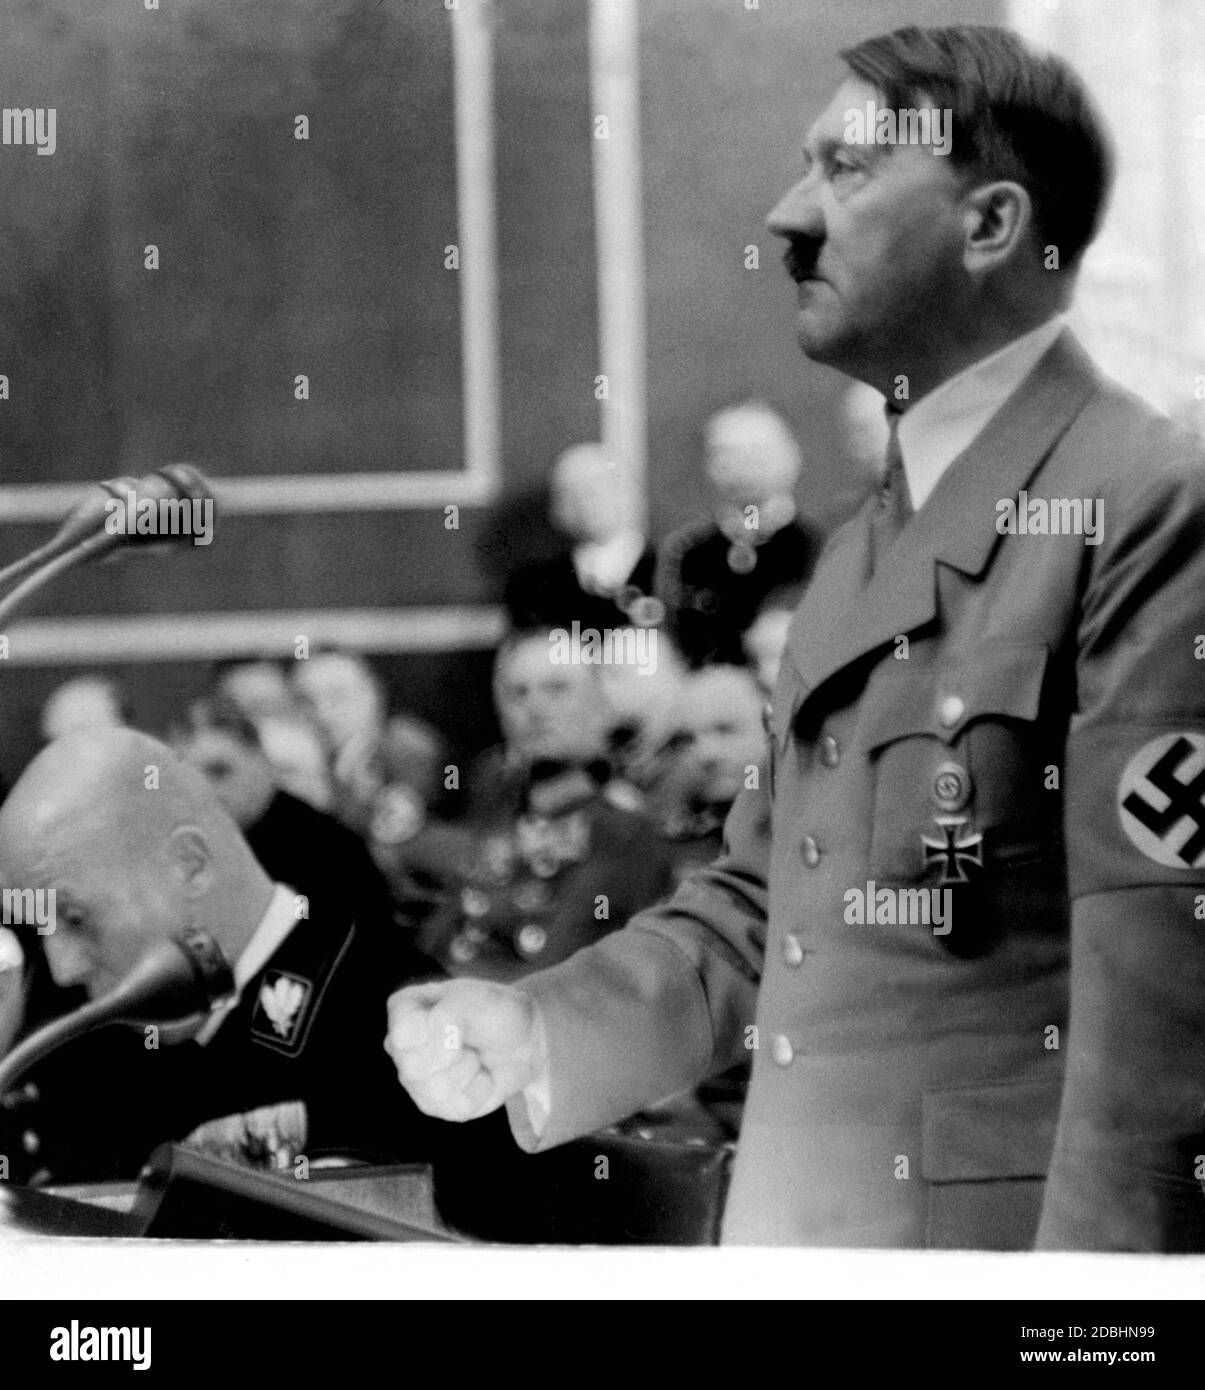 Adolf Hitler gives a speech in the Reichstag. Stock Photo